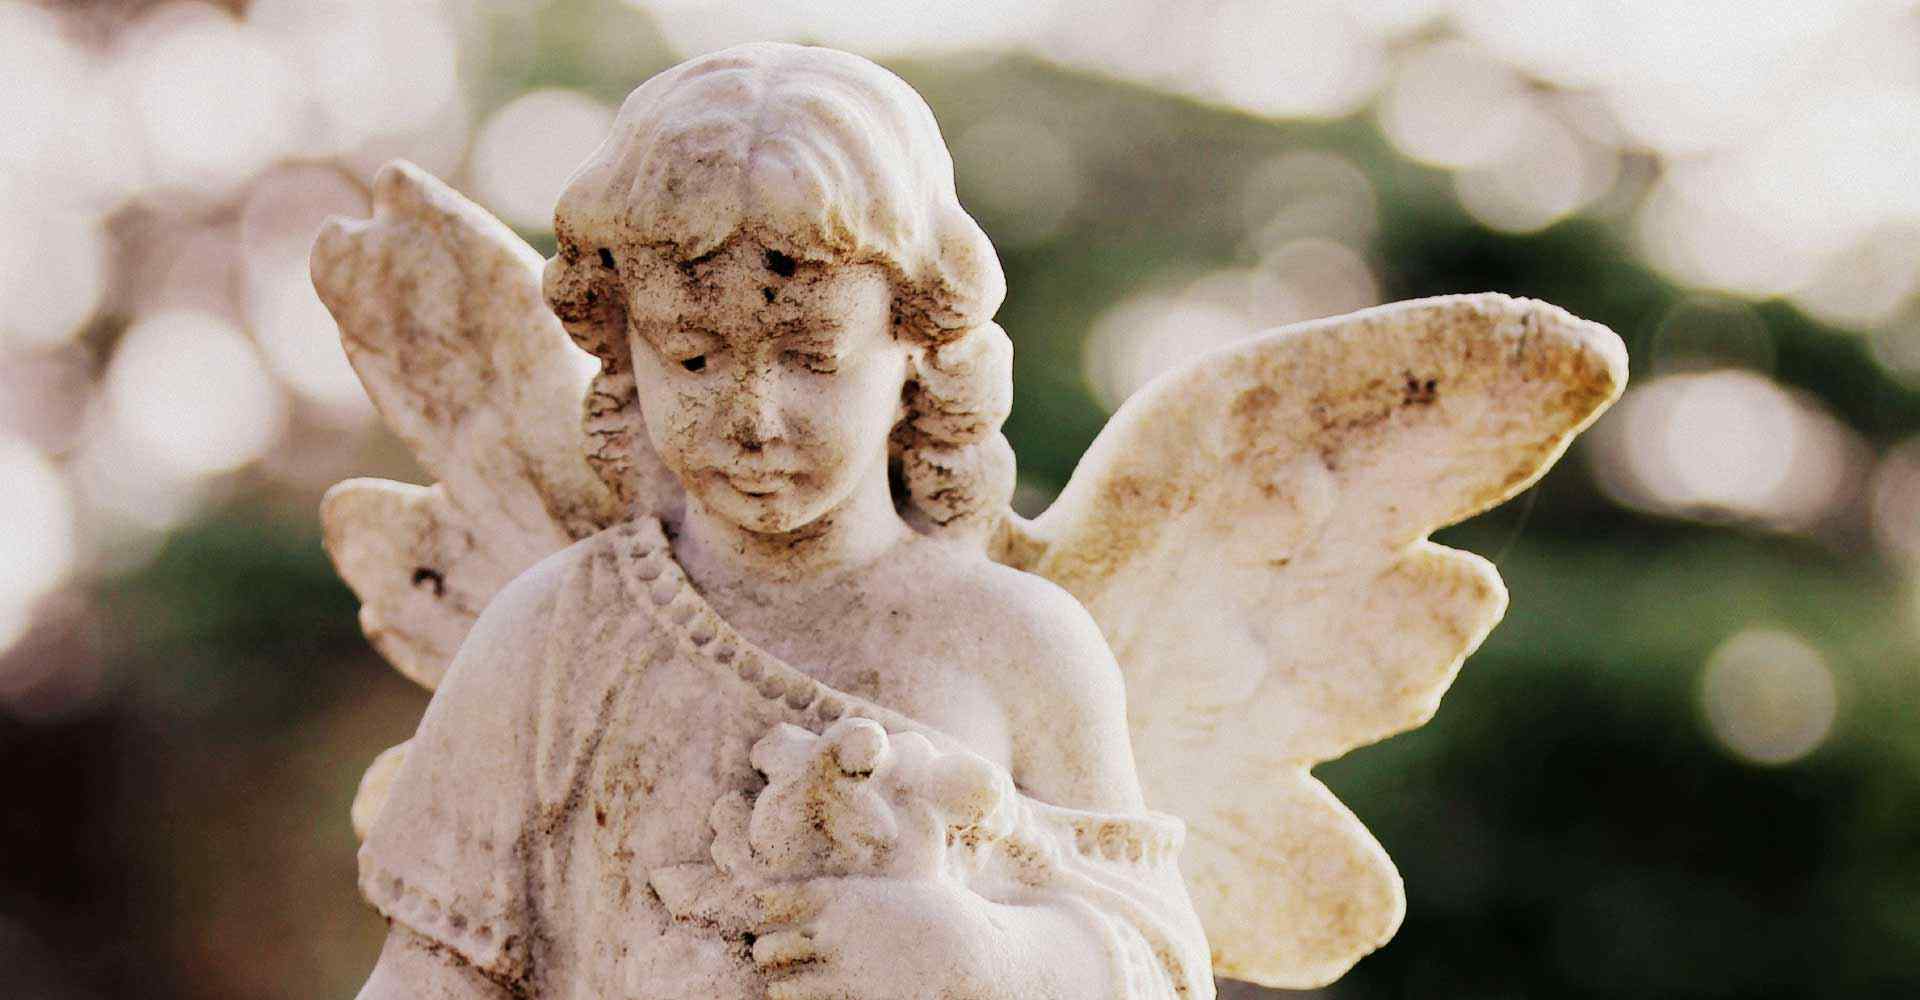 A mourning statue from the funeral home helped by an experienced answering service